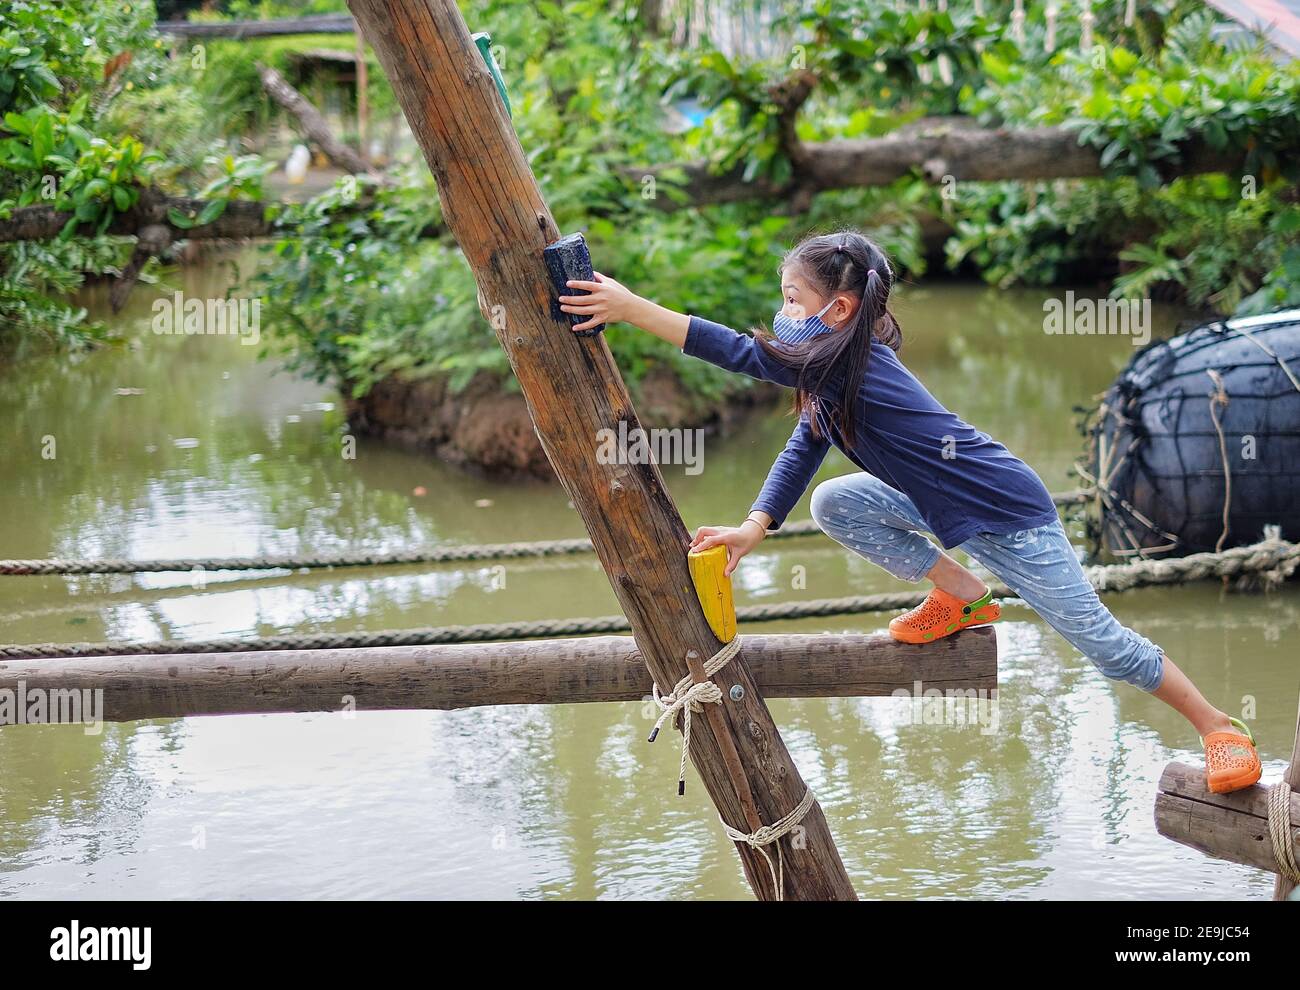 A cute young Asian girl trying to cross a small canal through a timber structure with opening gaps, being brave but cautious to reach her destination. Stock Photo